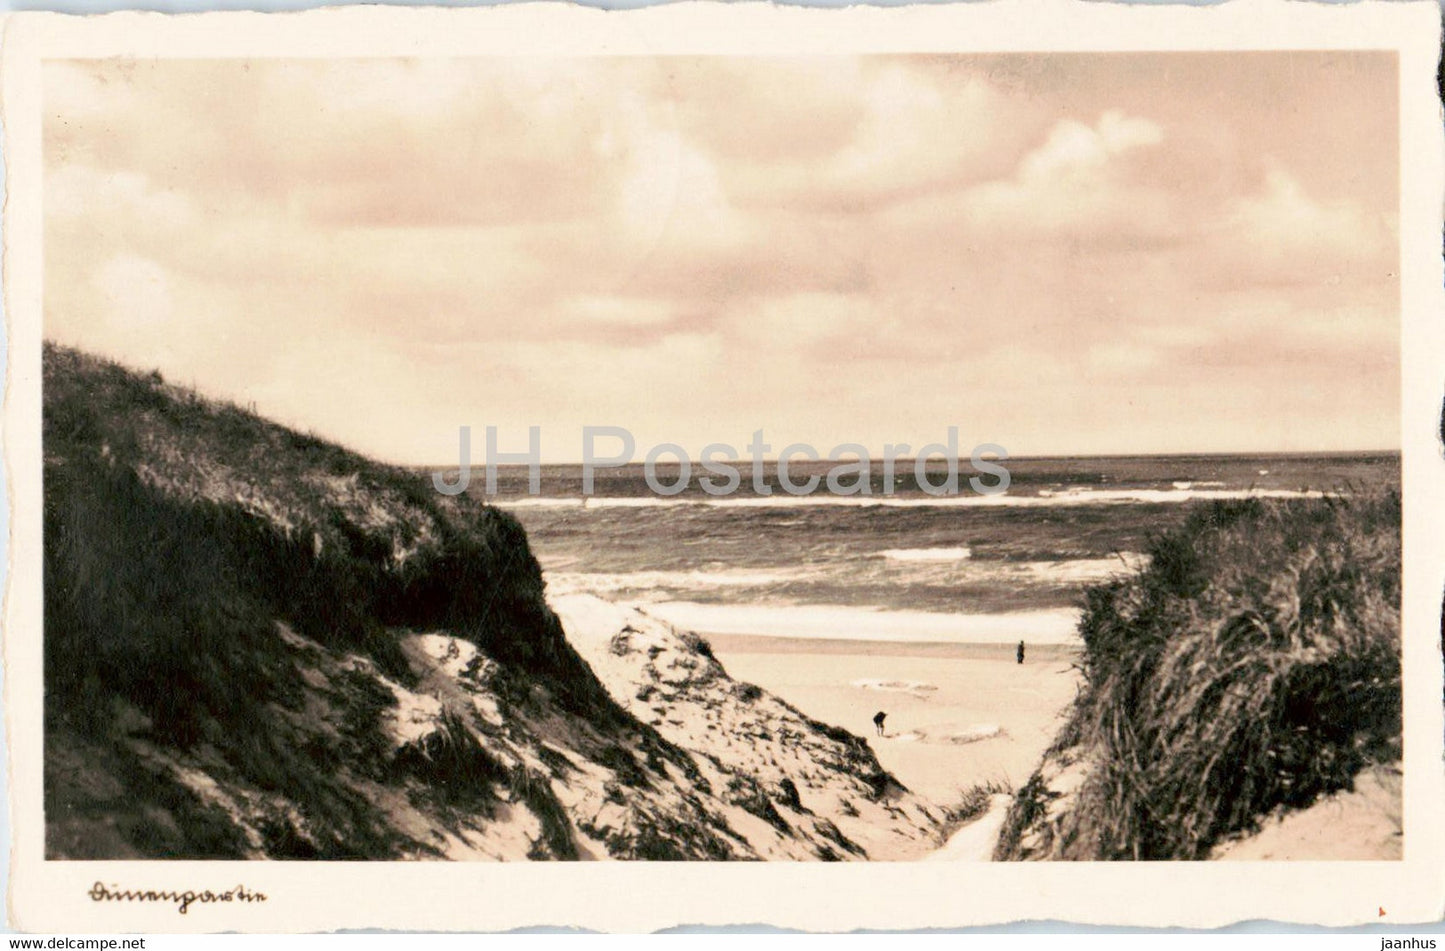 Dunenpartie - coast - old postcard - 1935 - Germany - used - JH Postcards